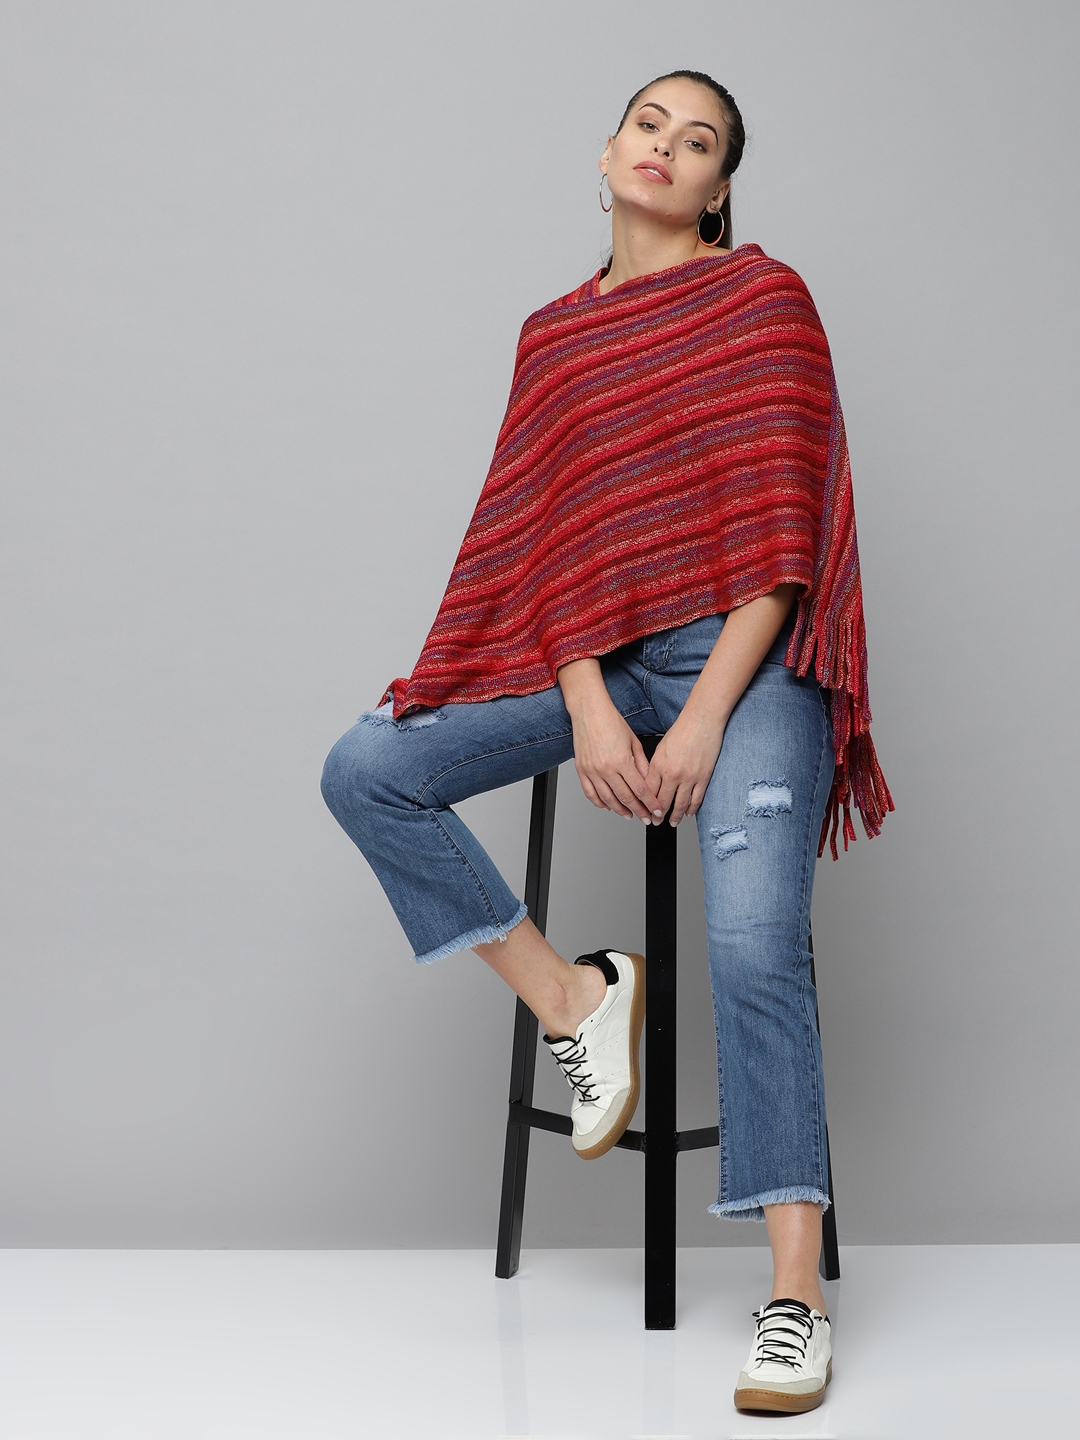 Women's Red Acrylic Striped Sweaters